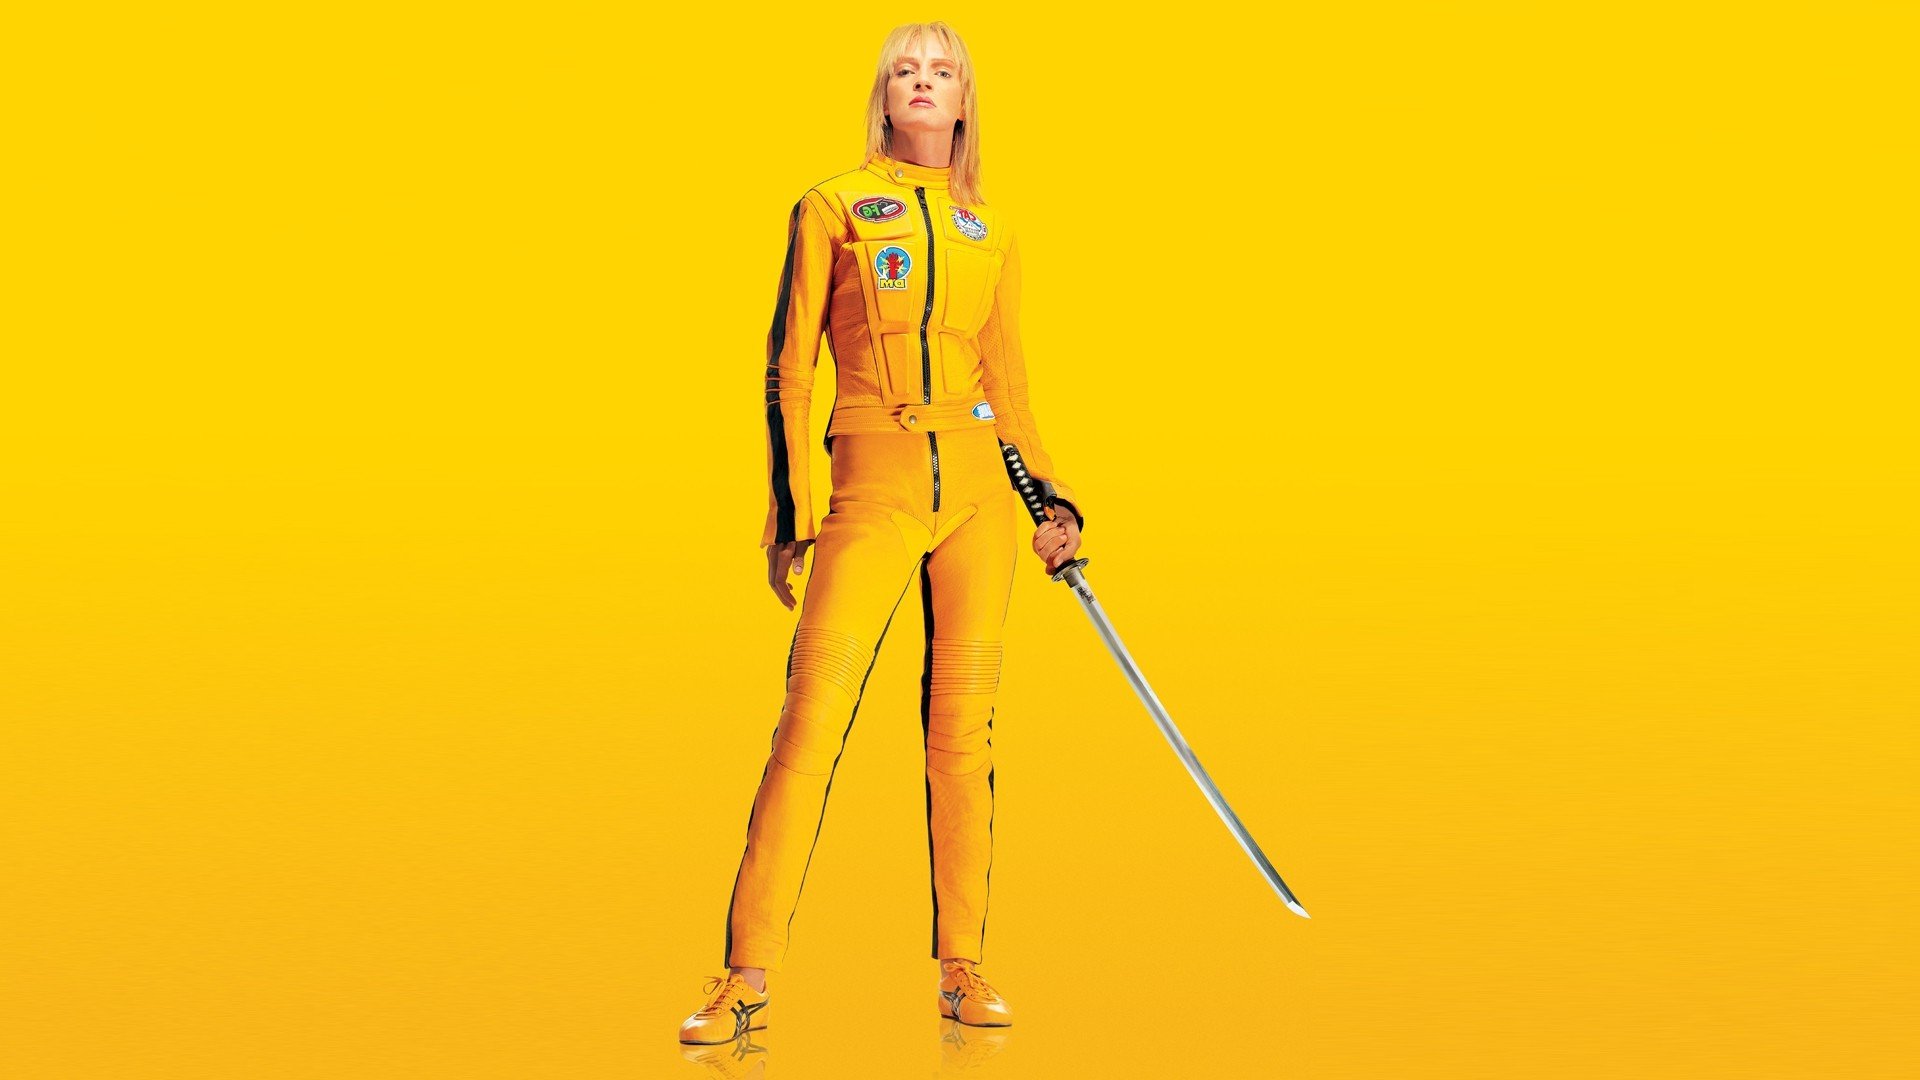 Kill Bill Backgrounds, Compatible - PC, Mobile, Gadgets| 1920x1080 px